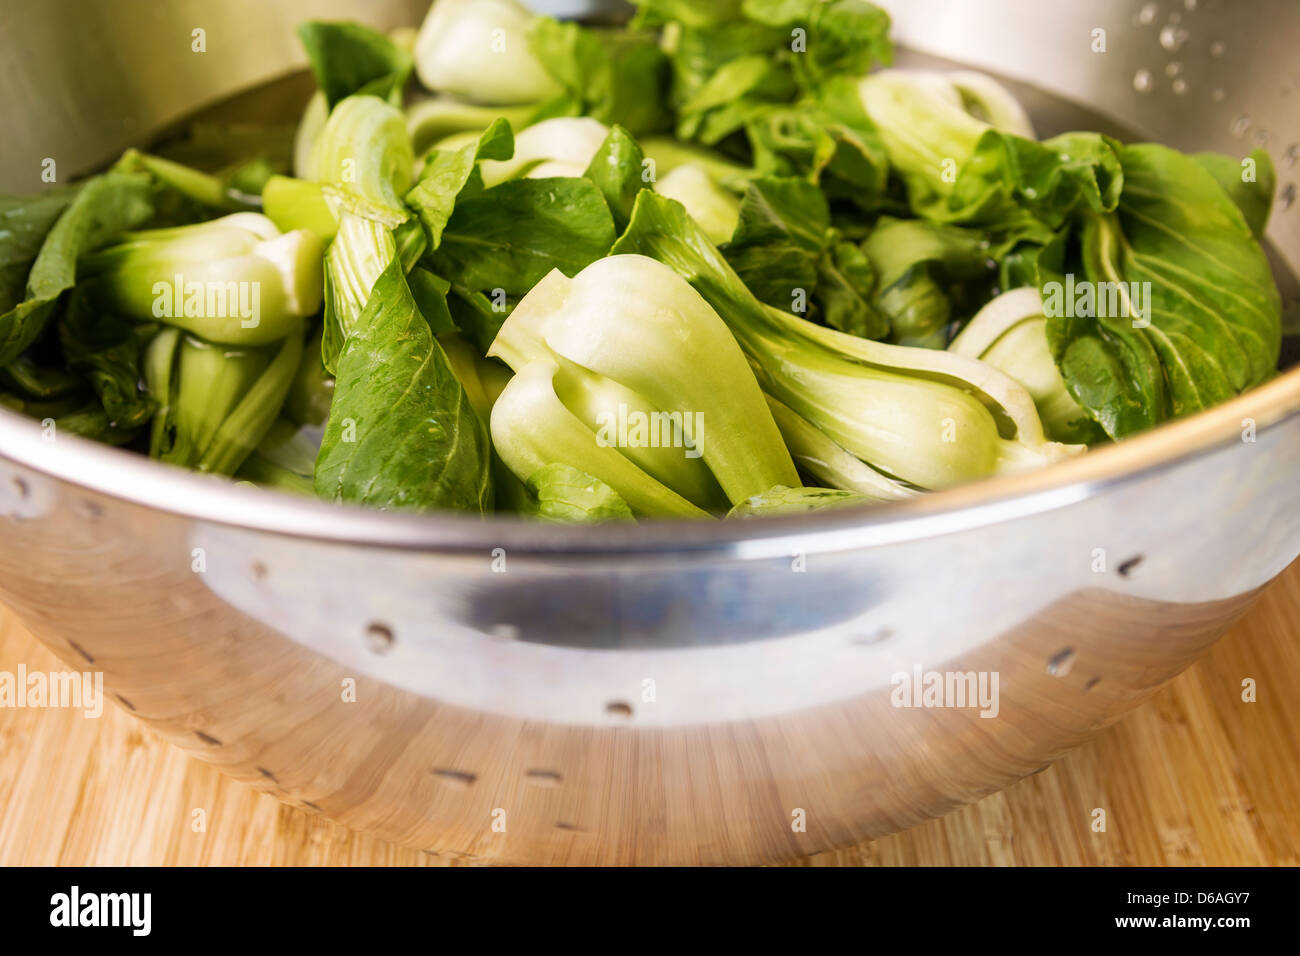 Closeup horizontal photo of washed Chinese Choy in Stainless Steel bowl on natural bamboo wood Stock Photo